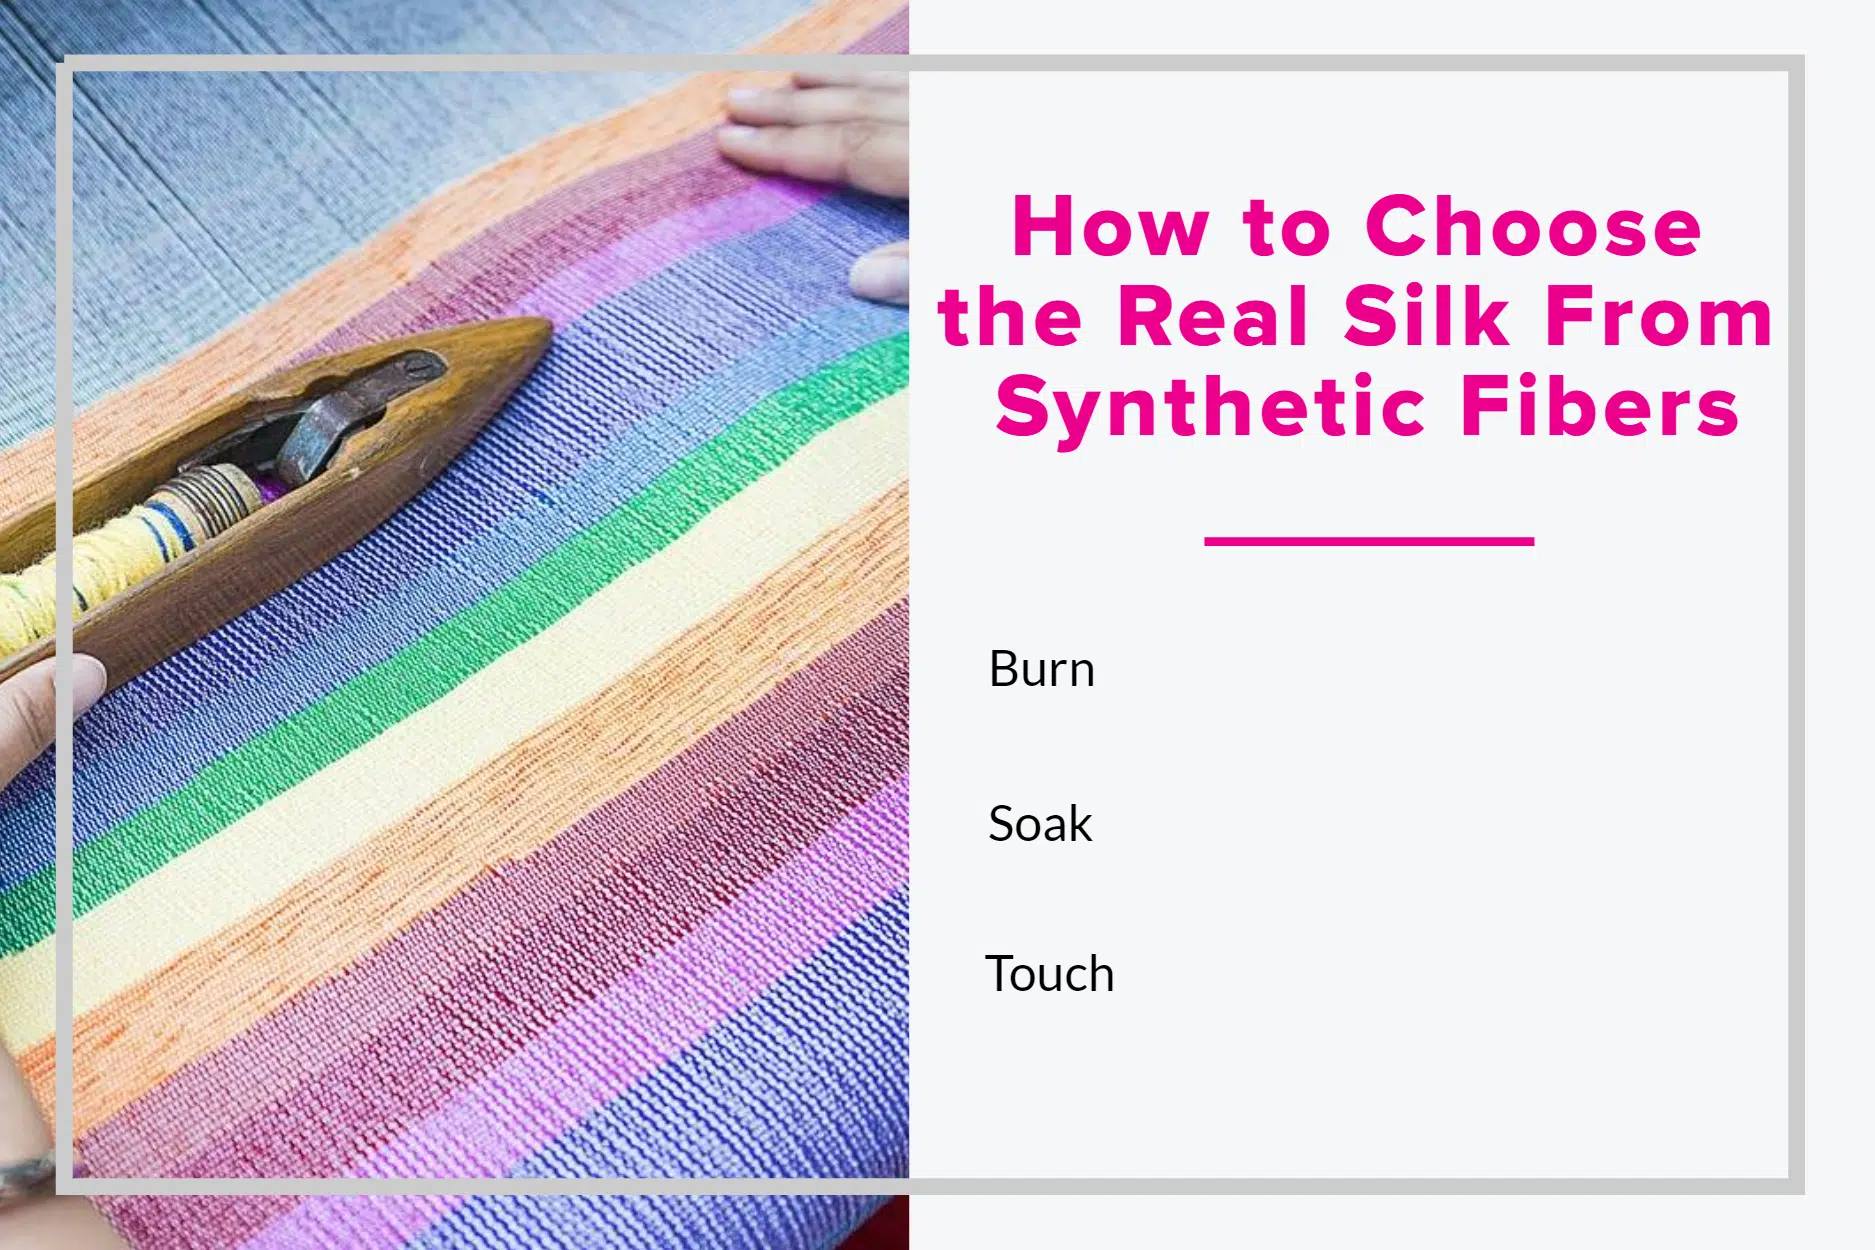 How to Choose the Real Silk From Synthetic Fibers